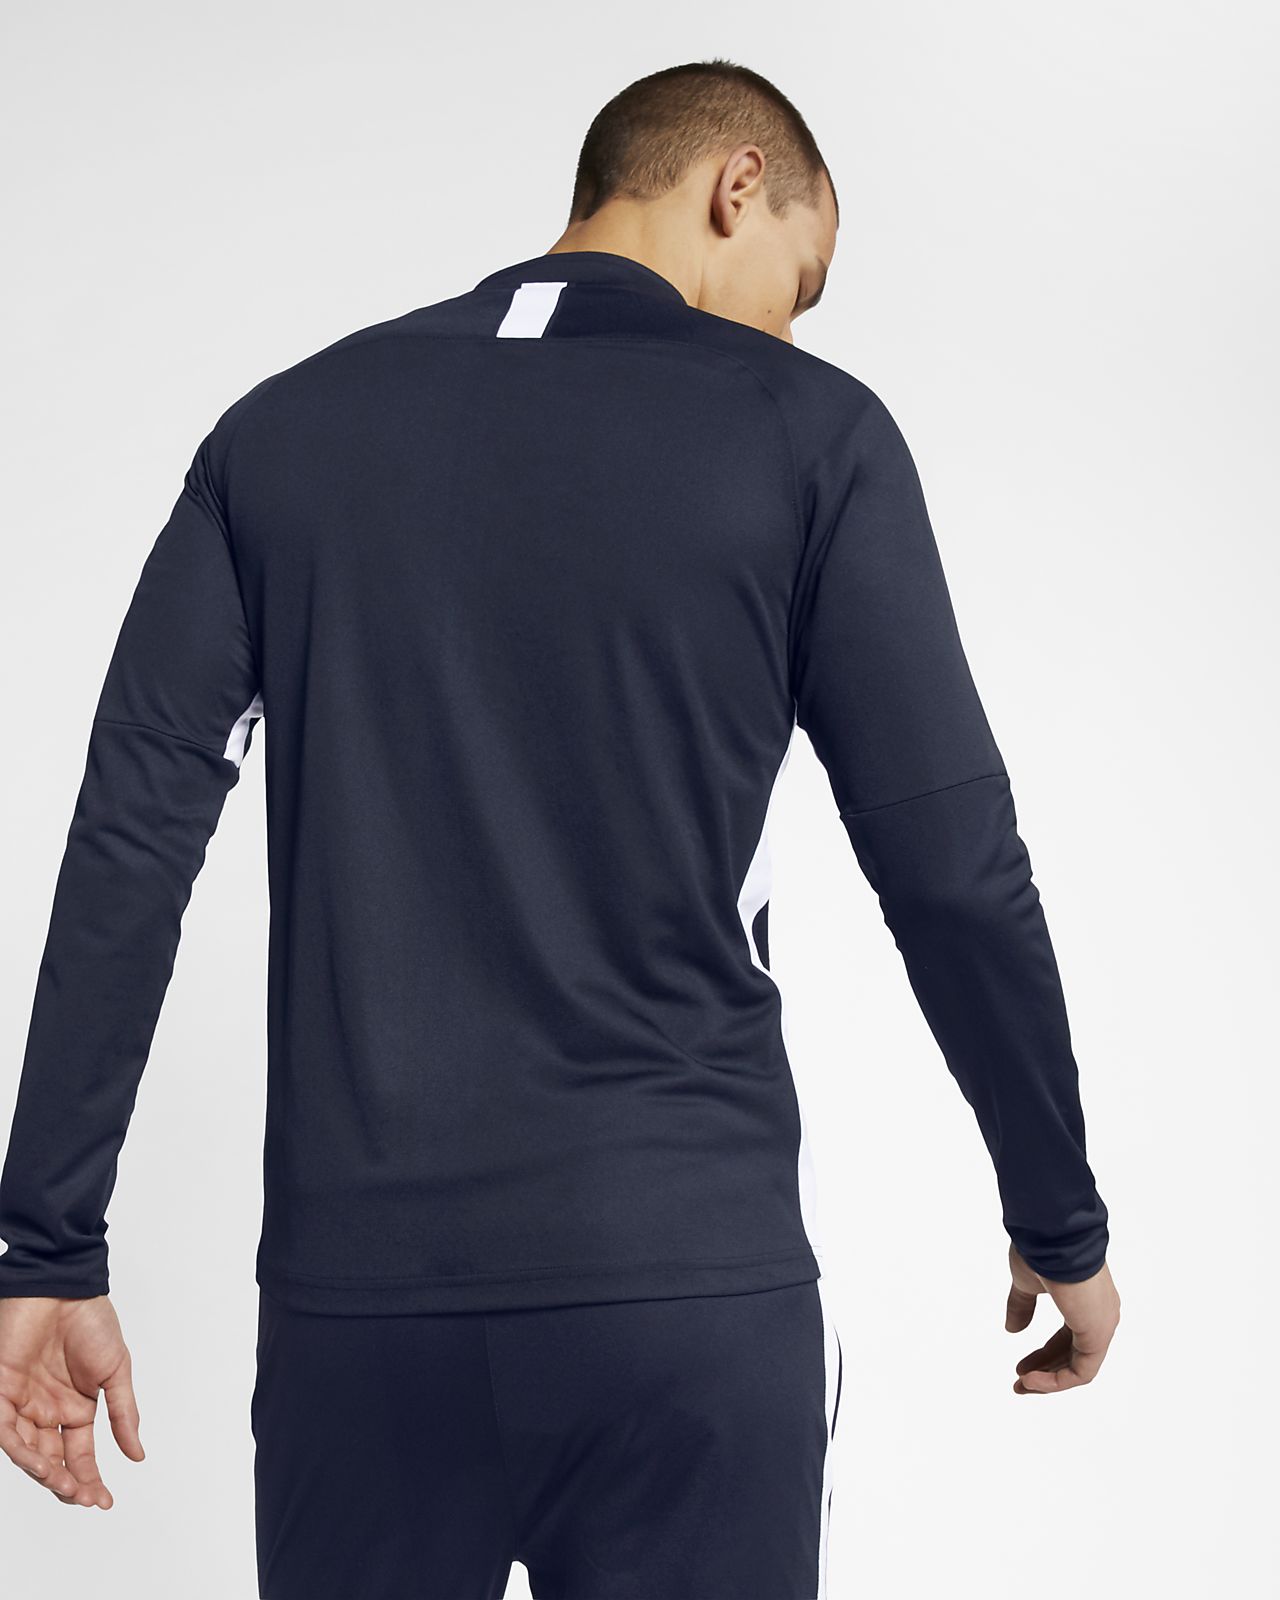 nike academy tracksuit top